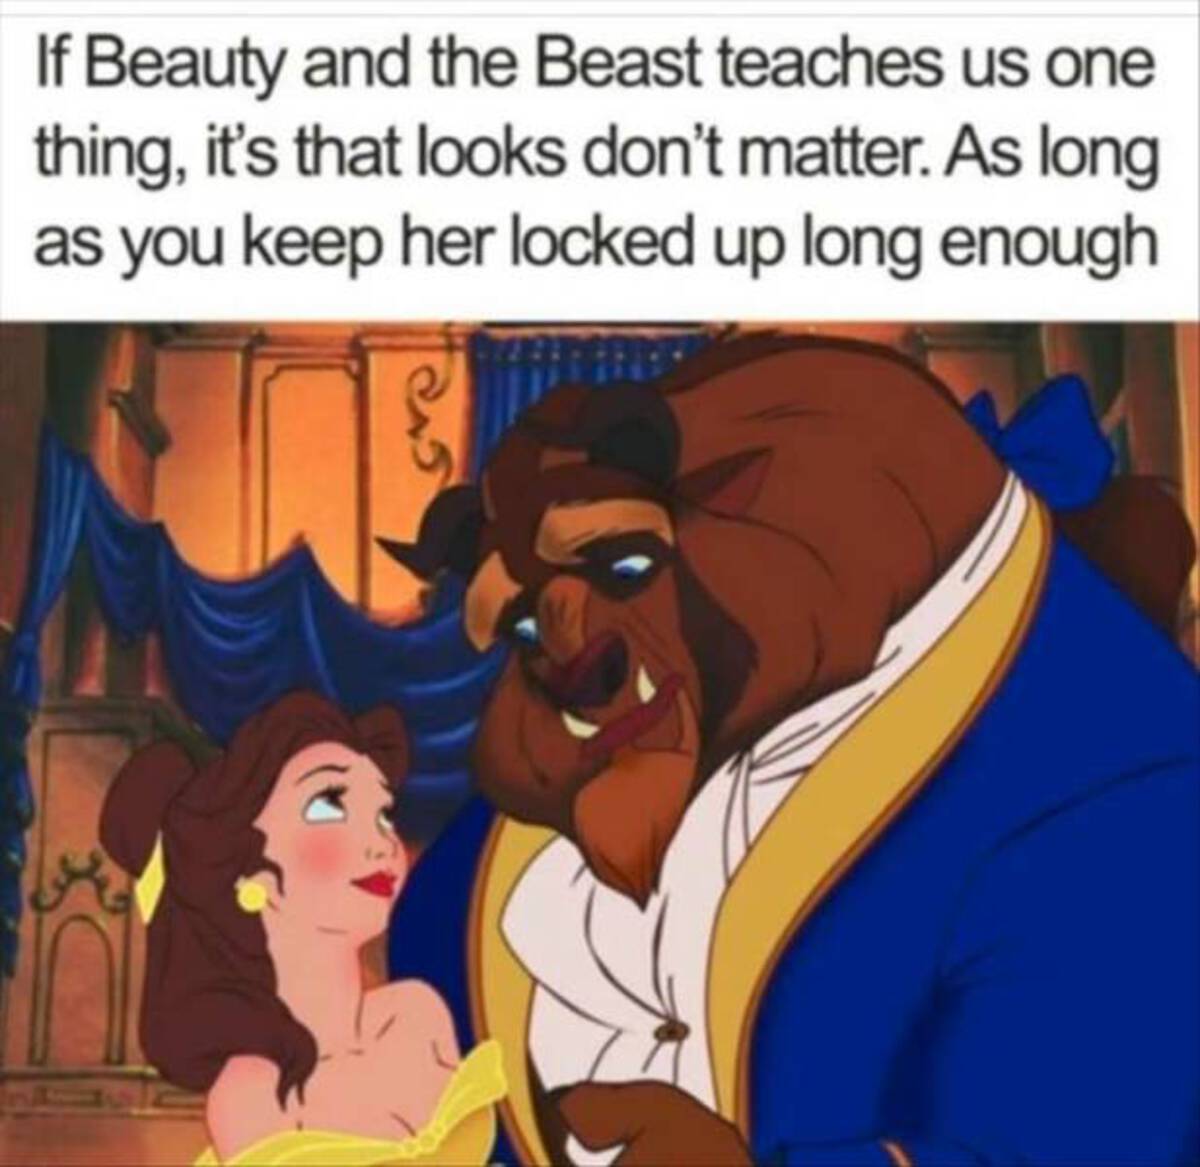 beauty and the beast disney - If Beauty and the Beast teaches us one thing, it's that looks don't matter. As long as you keep her locked up long enough